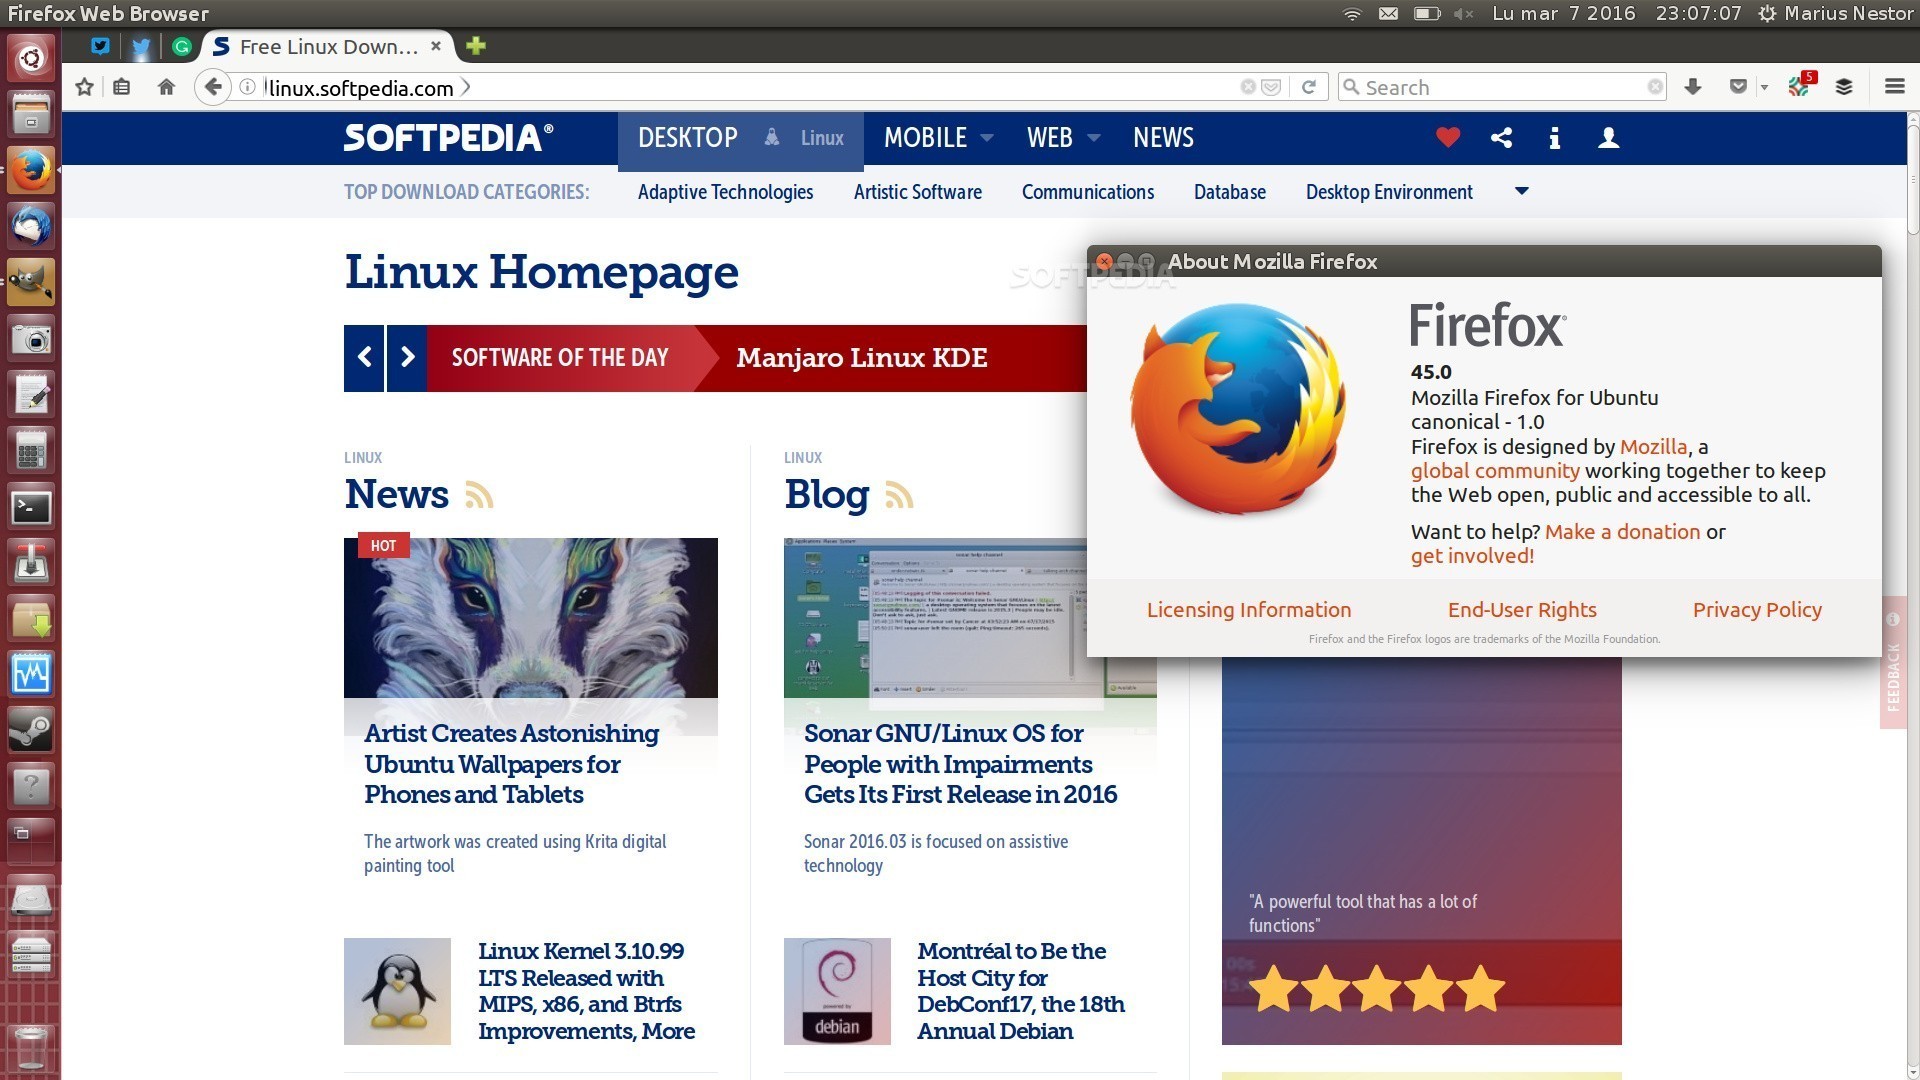 mozilla-firefox-45-0-2-released-for-linux-windows-mac-os-x-with-more-bugfixes-502821-2.jpg